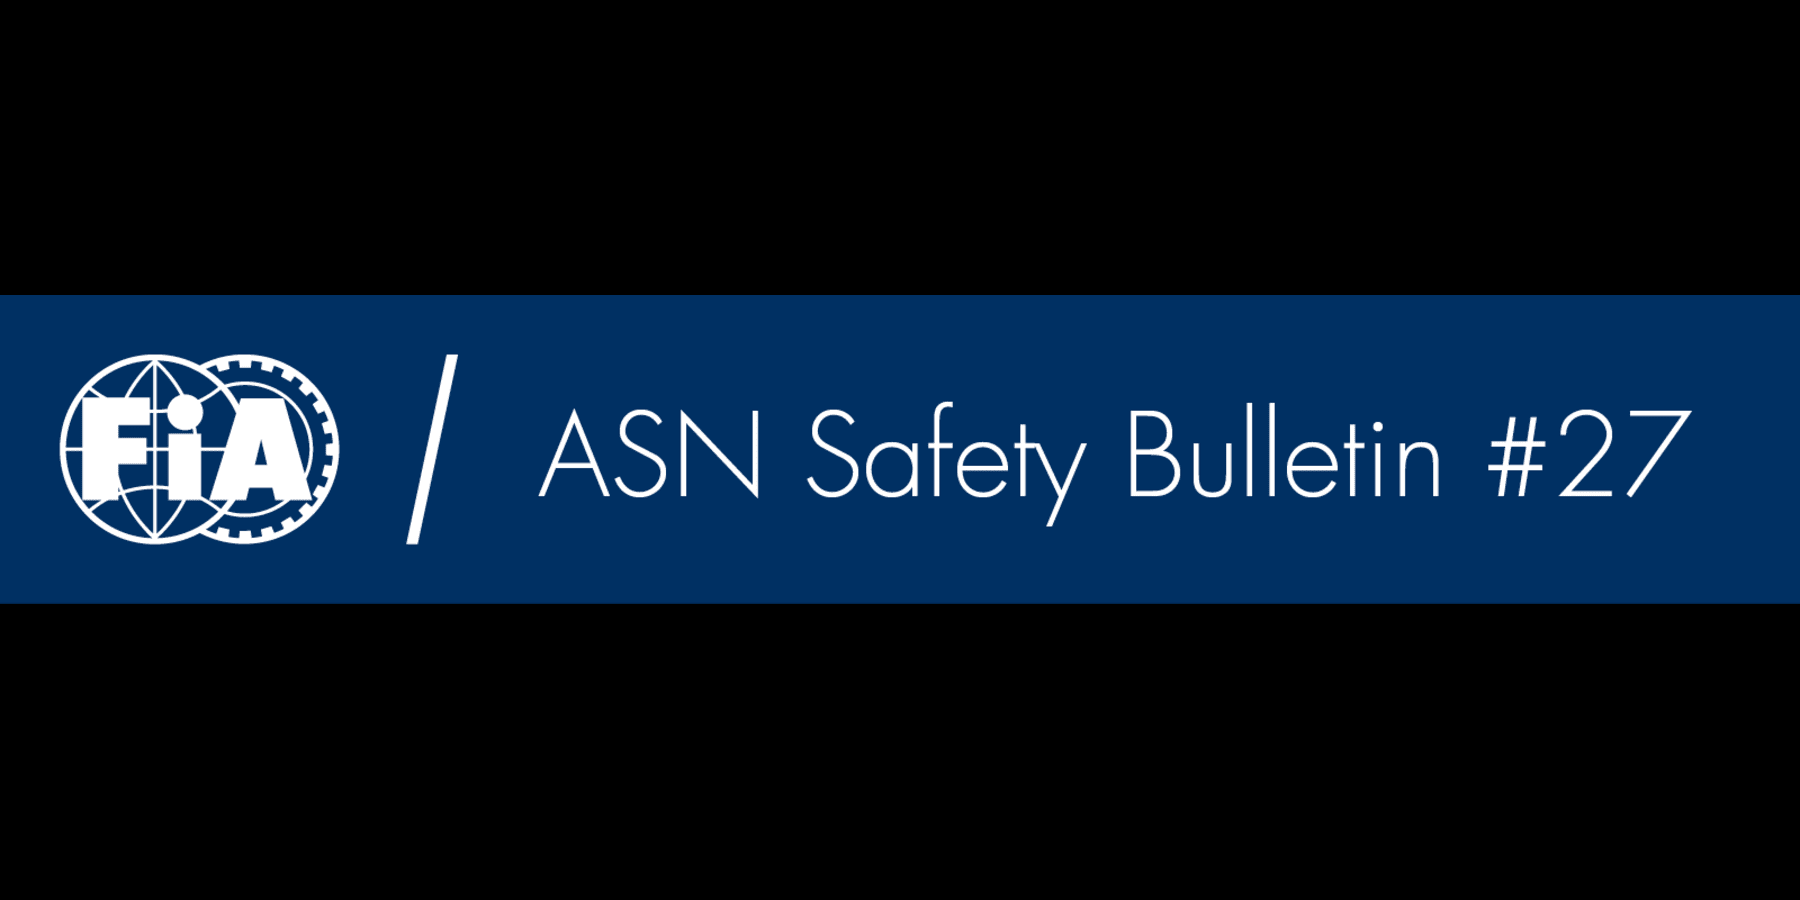 Blog hero image for the post titled: ASN Safety Bulletin #27 2022 ASN Safety Bulletin Compilation & Safety Week announcement